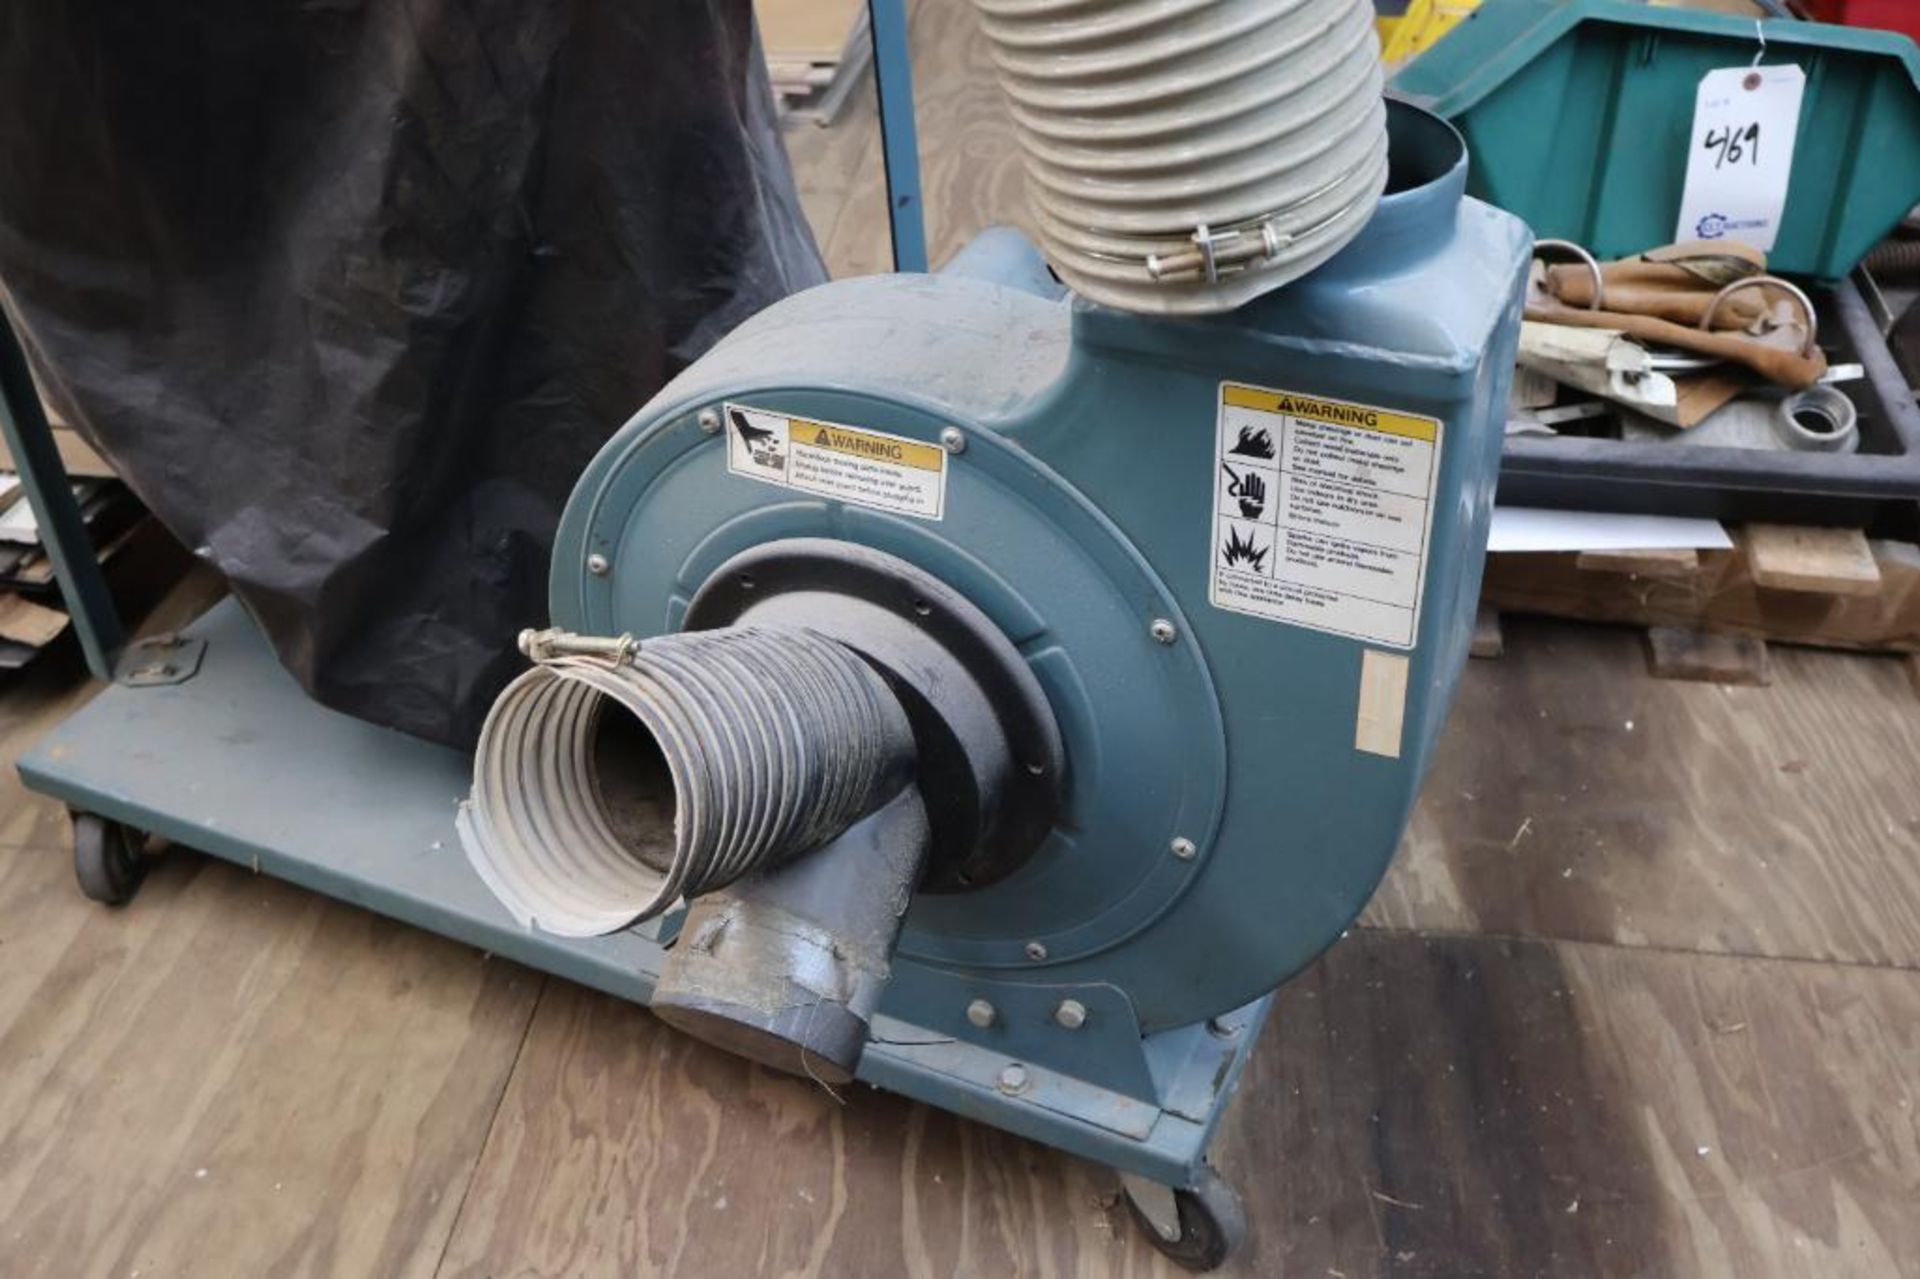 Jet DC1200 dust collector - Image 4 of 11